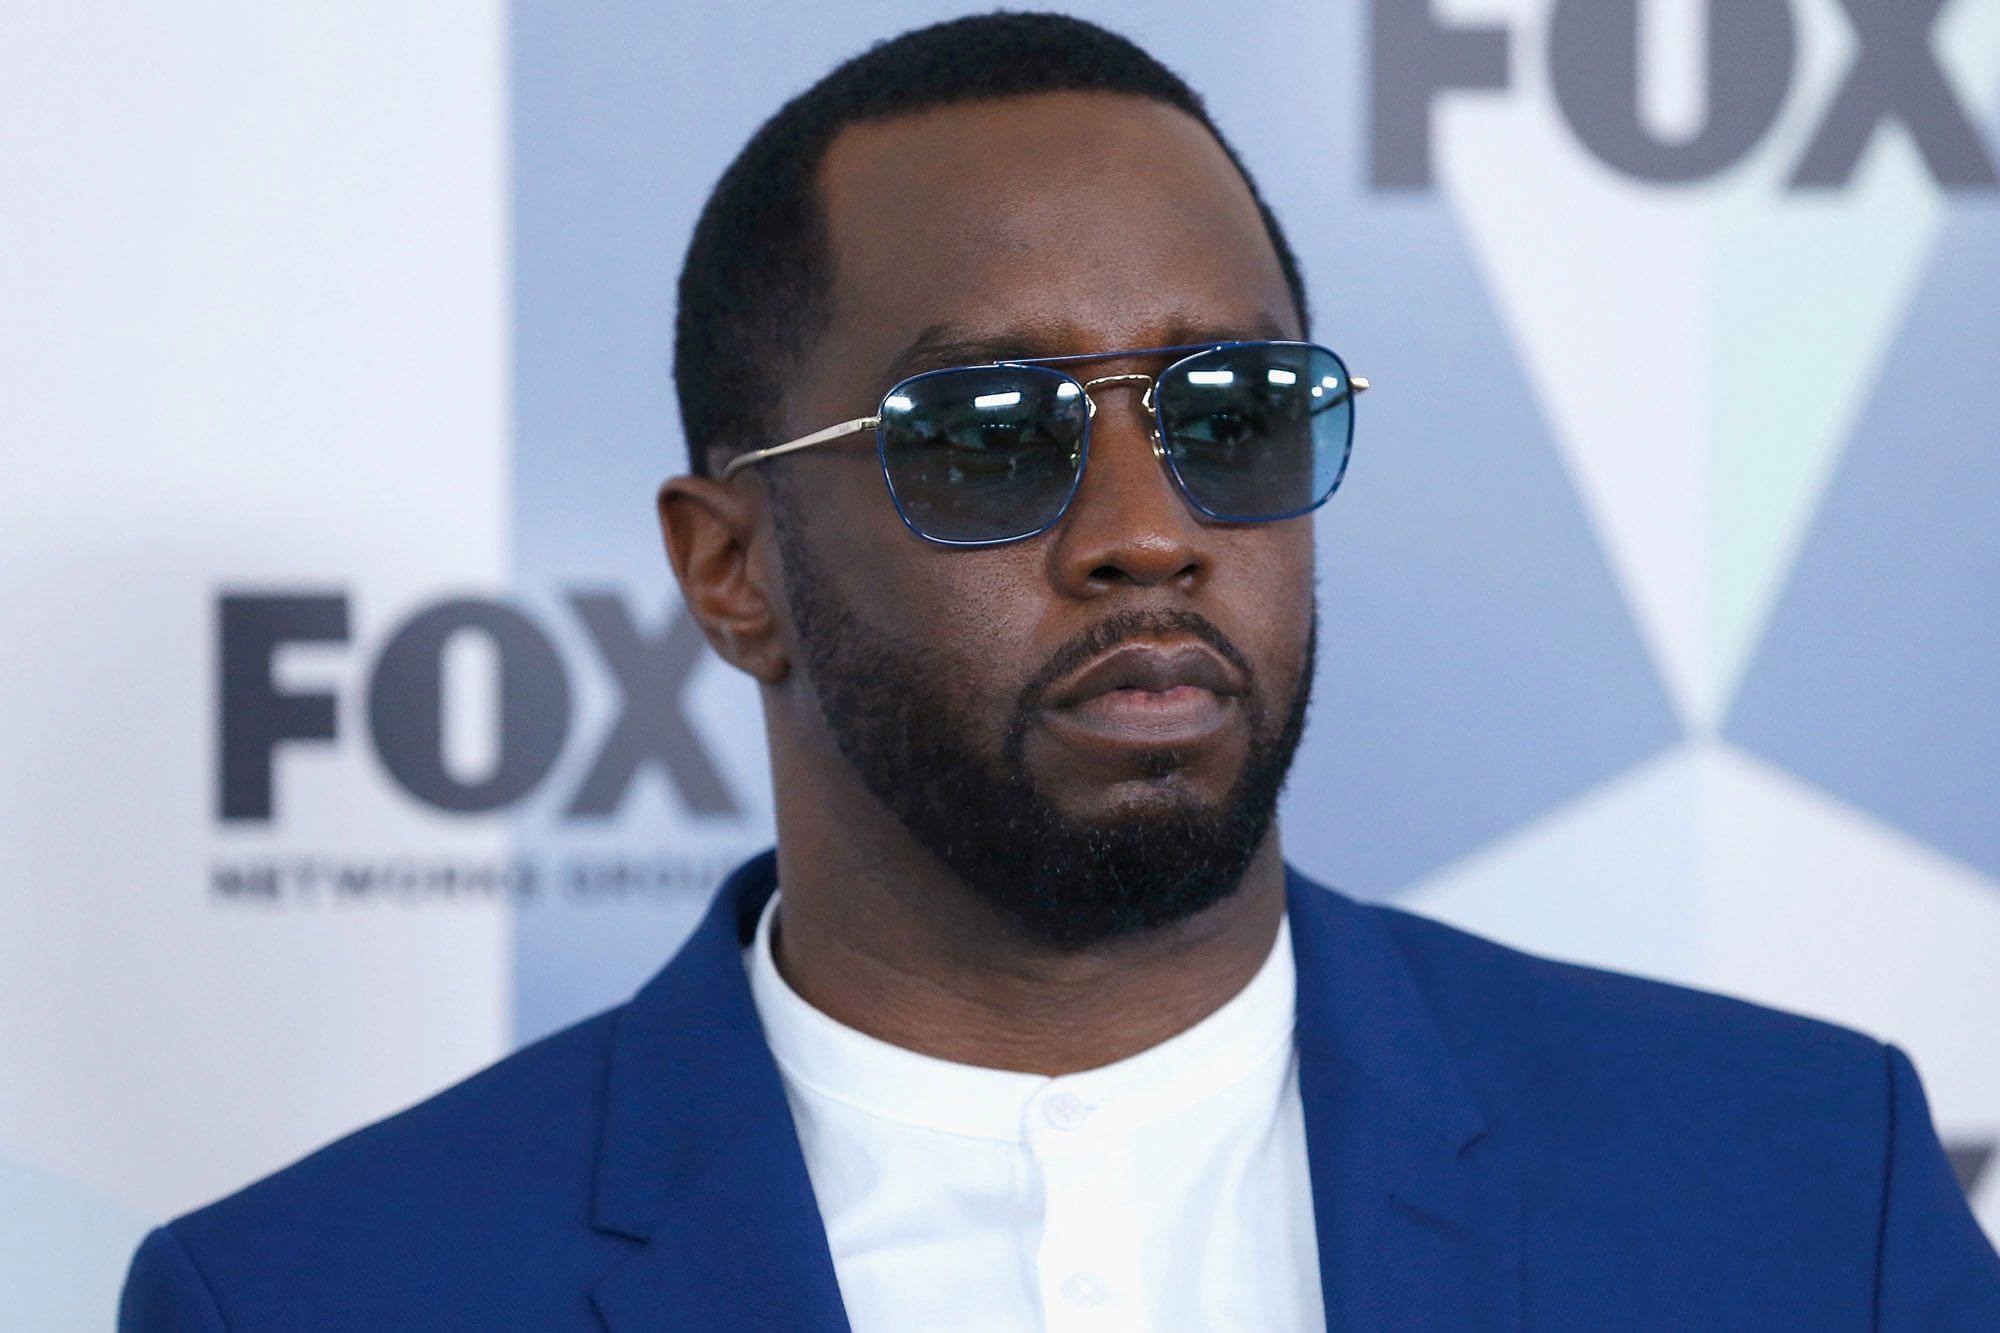 Diddy Celebrated The Birthday Of His Mother - Check Out The Video He Dropped To mark The Event